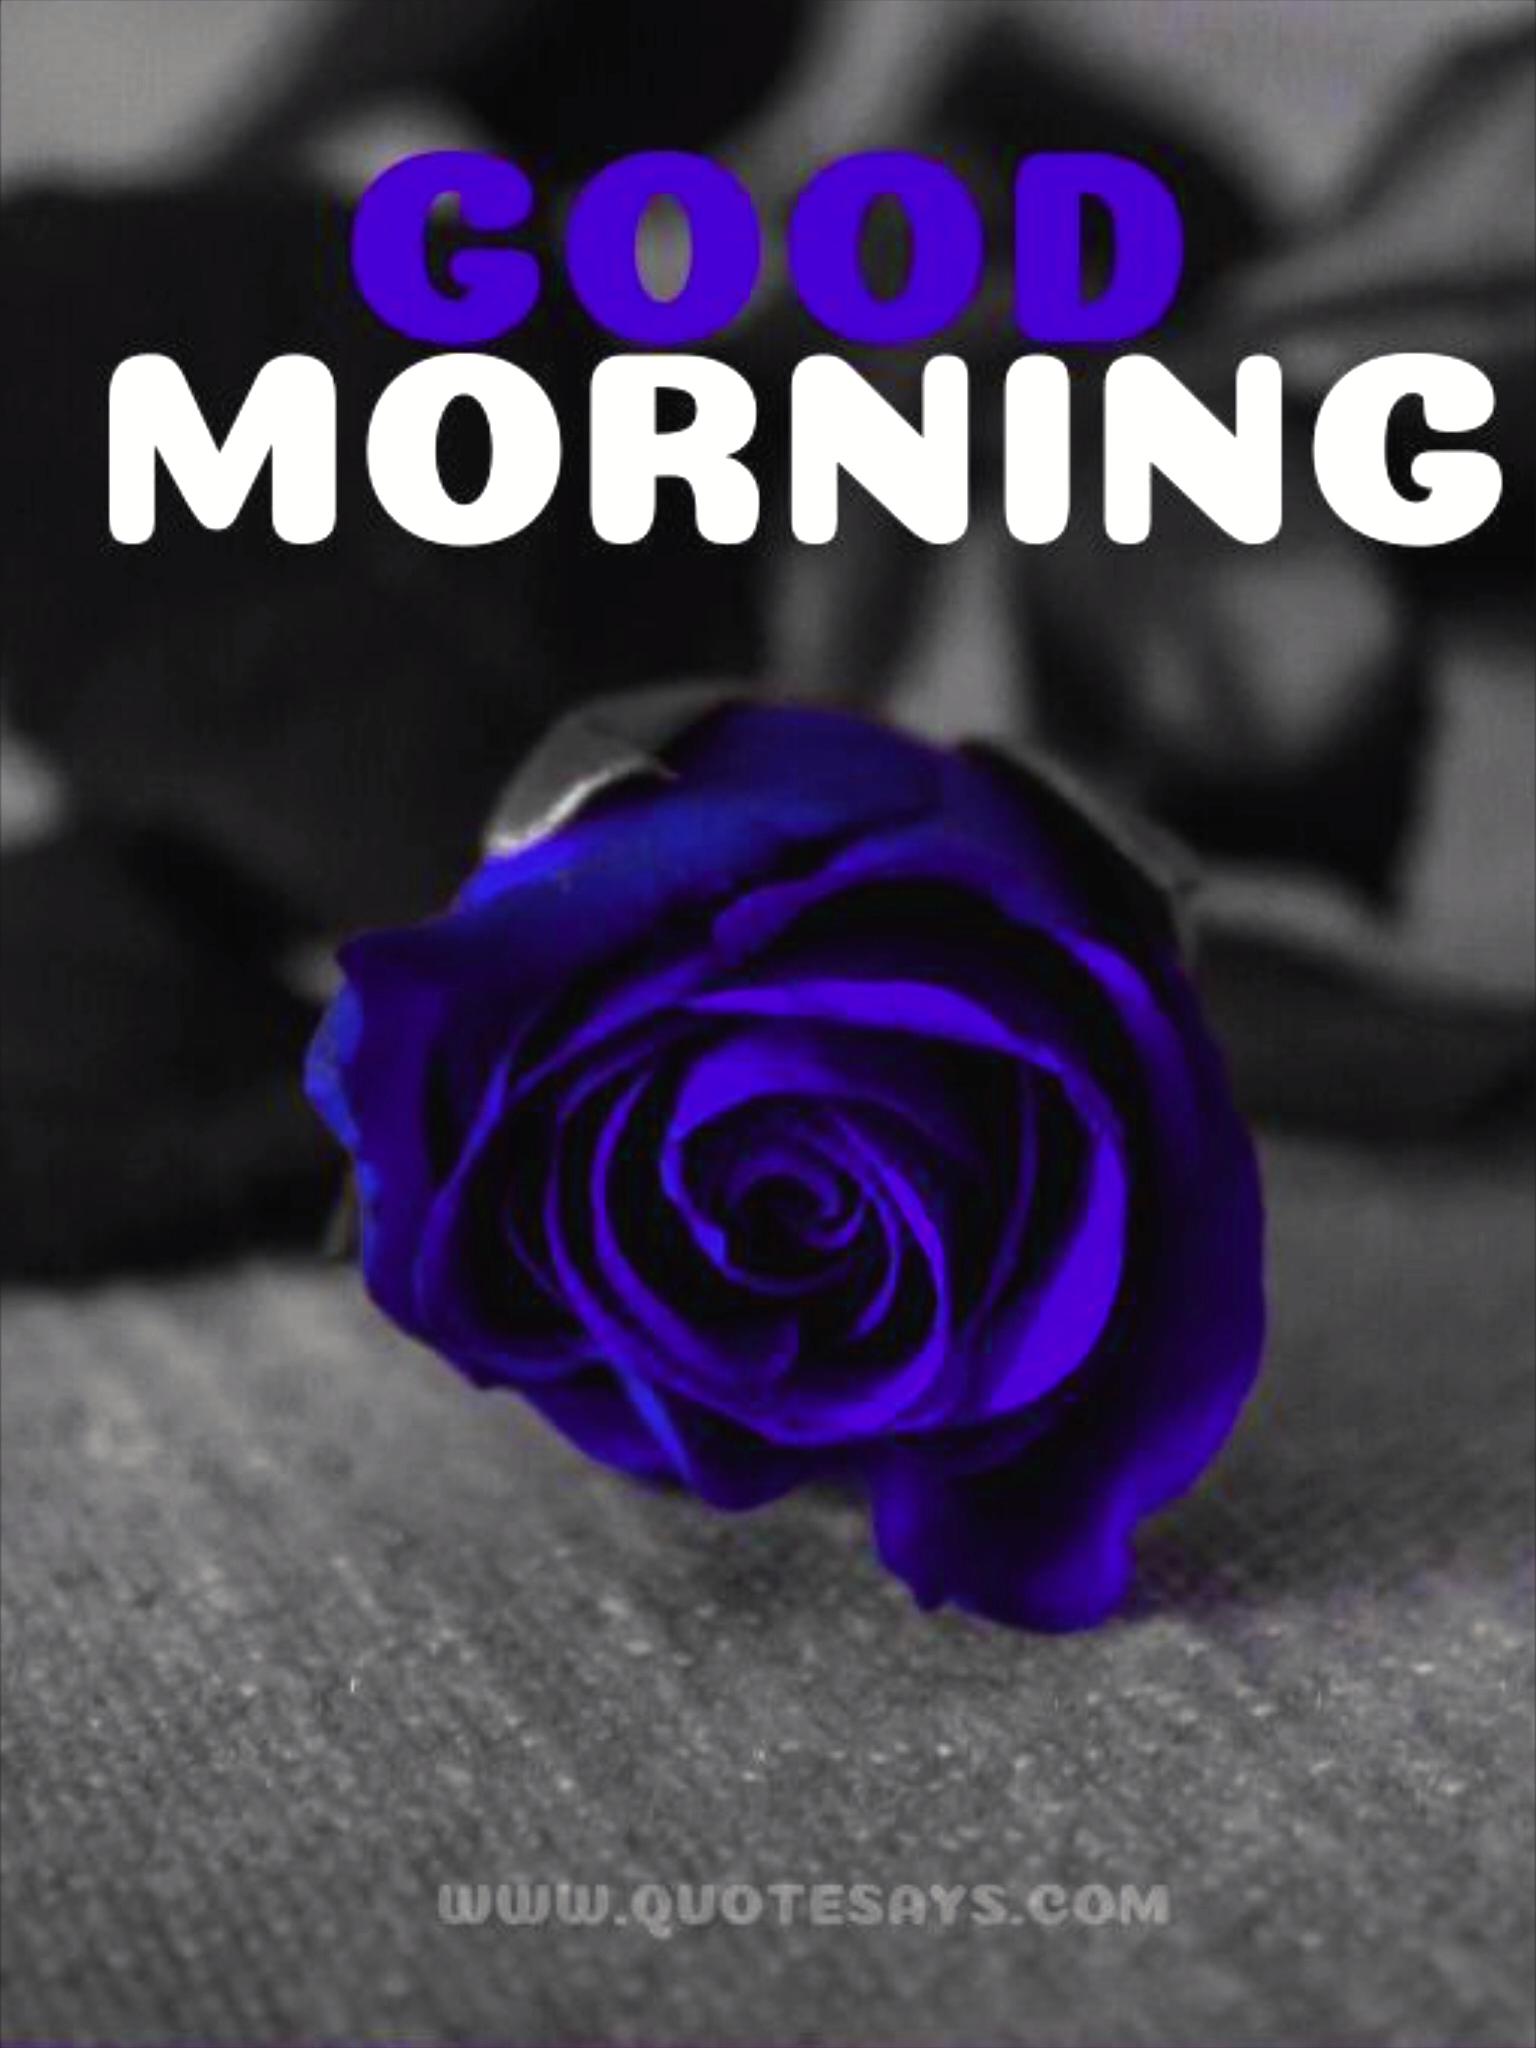 Say Good Morning With Colorful Rose Best Way To Say Good Morning To Your Loved Ones.